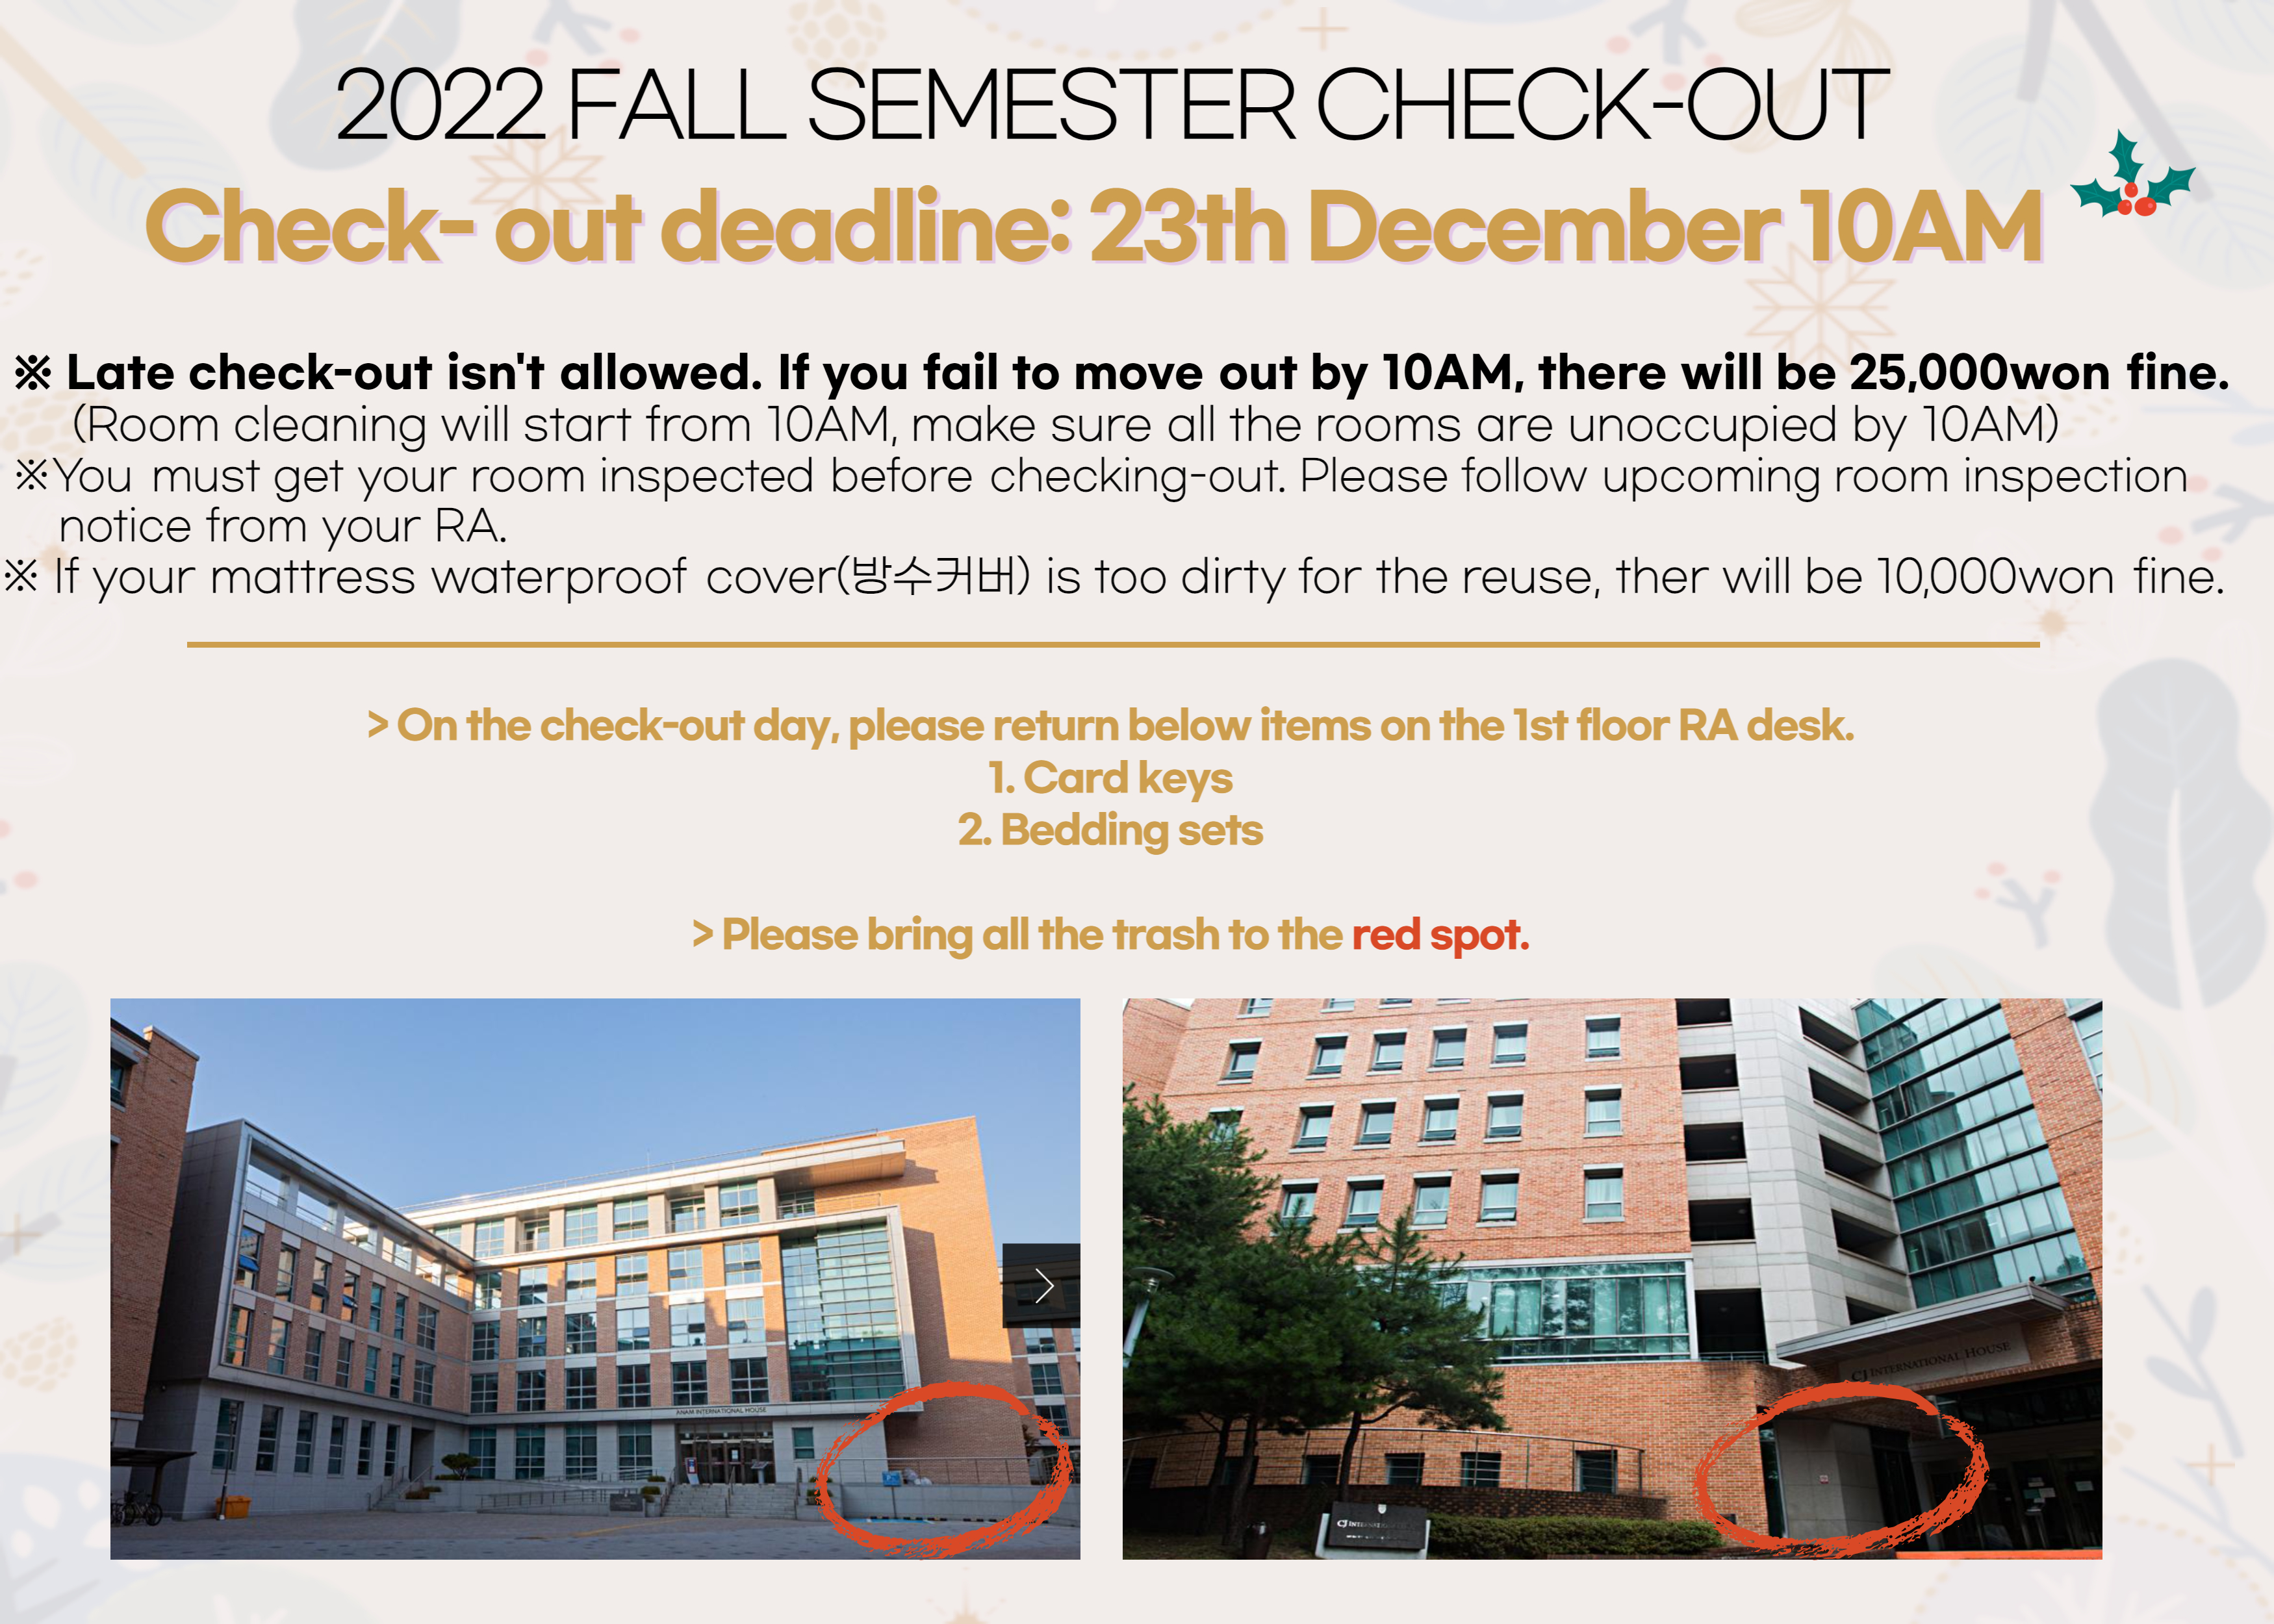 [CJ/Anam I-house] 2022 Fall Semester Check-out & Donation Plan Notice 이미지